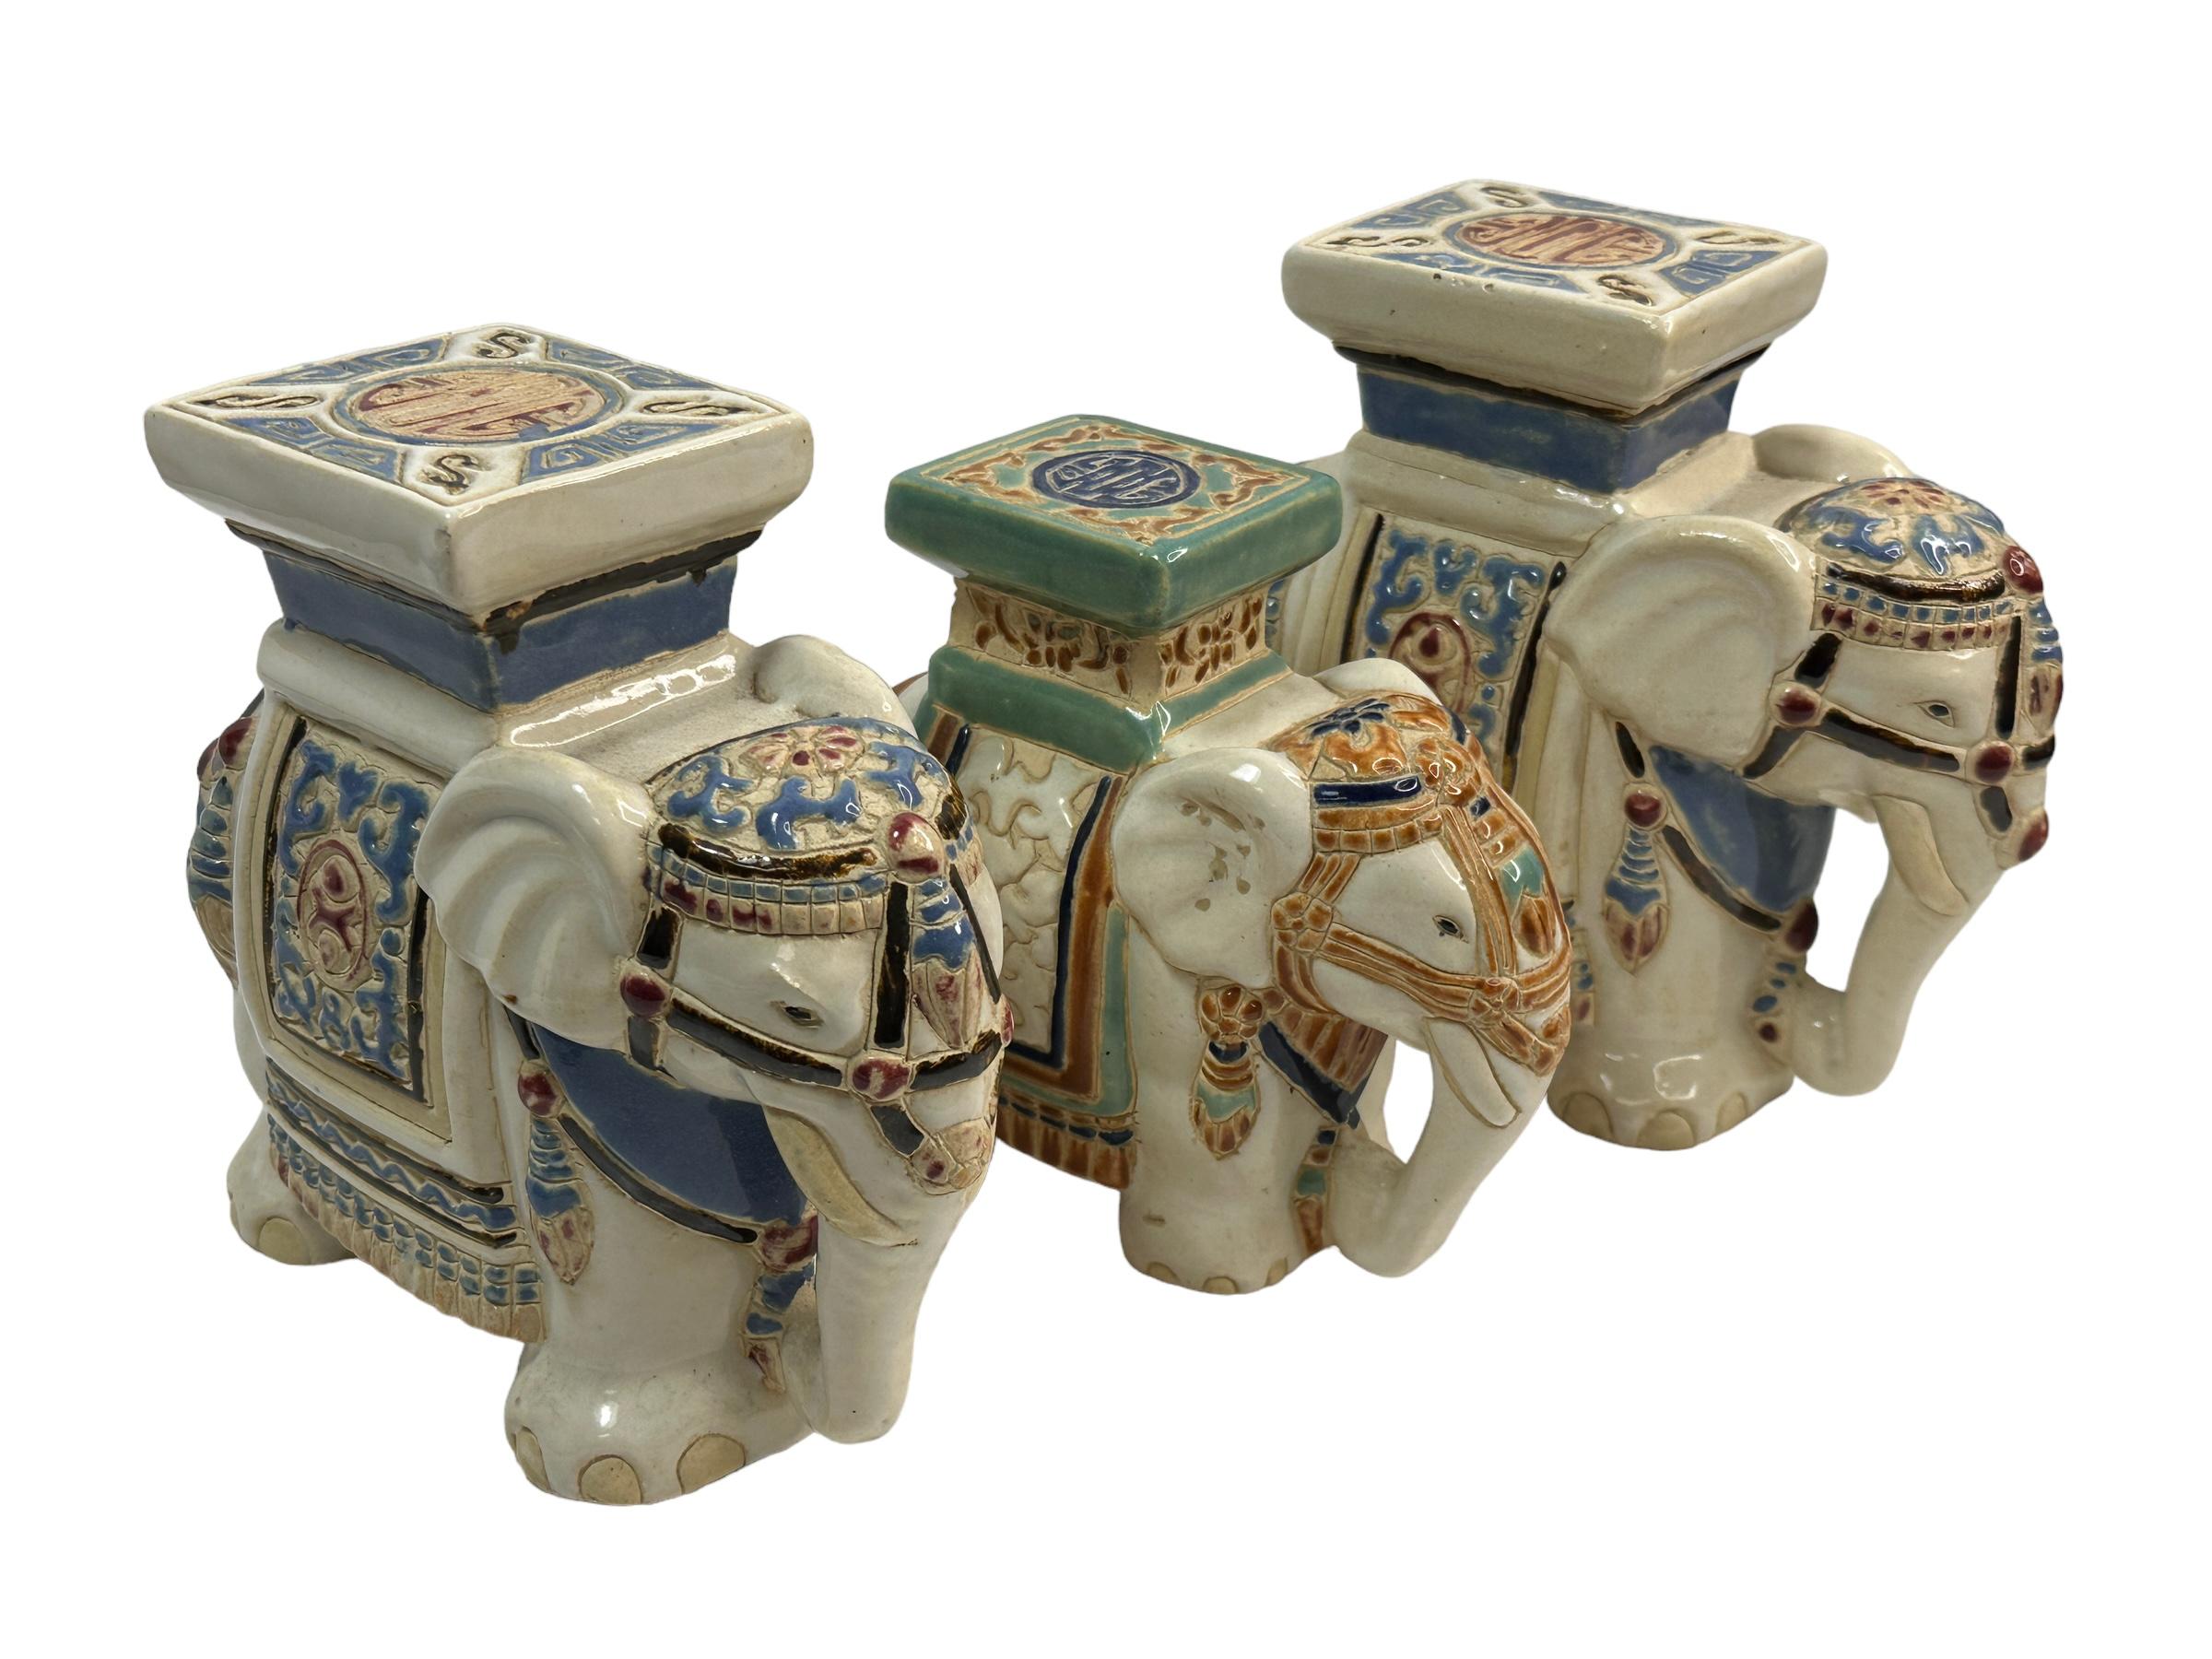 A set of three petite mid-20th century glazed ceramic elephant flower pot seats. Handmade of ceramic. Nice addition to your home, patio or garden. Found at an Estate Sale in Nuremberg, Germany. Two are a matching pair. one is a little smaller. The